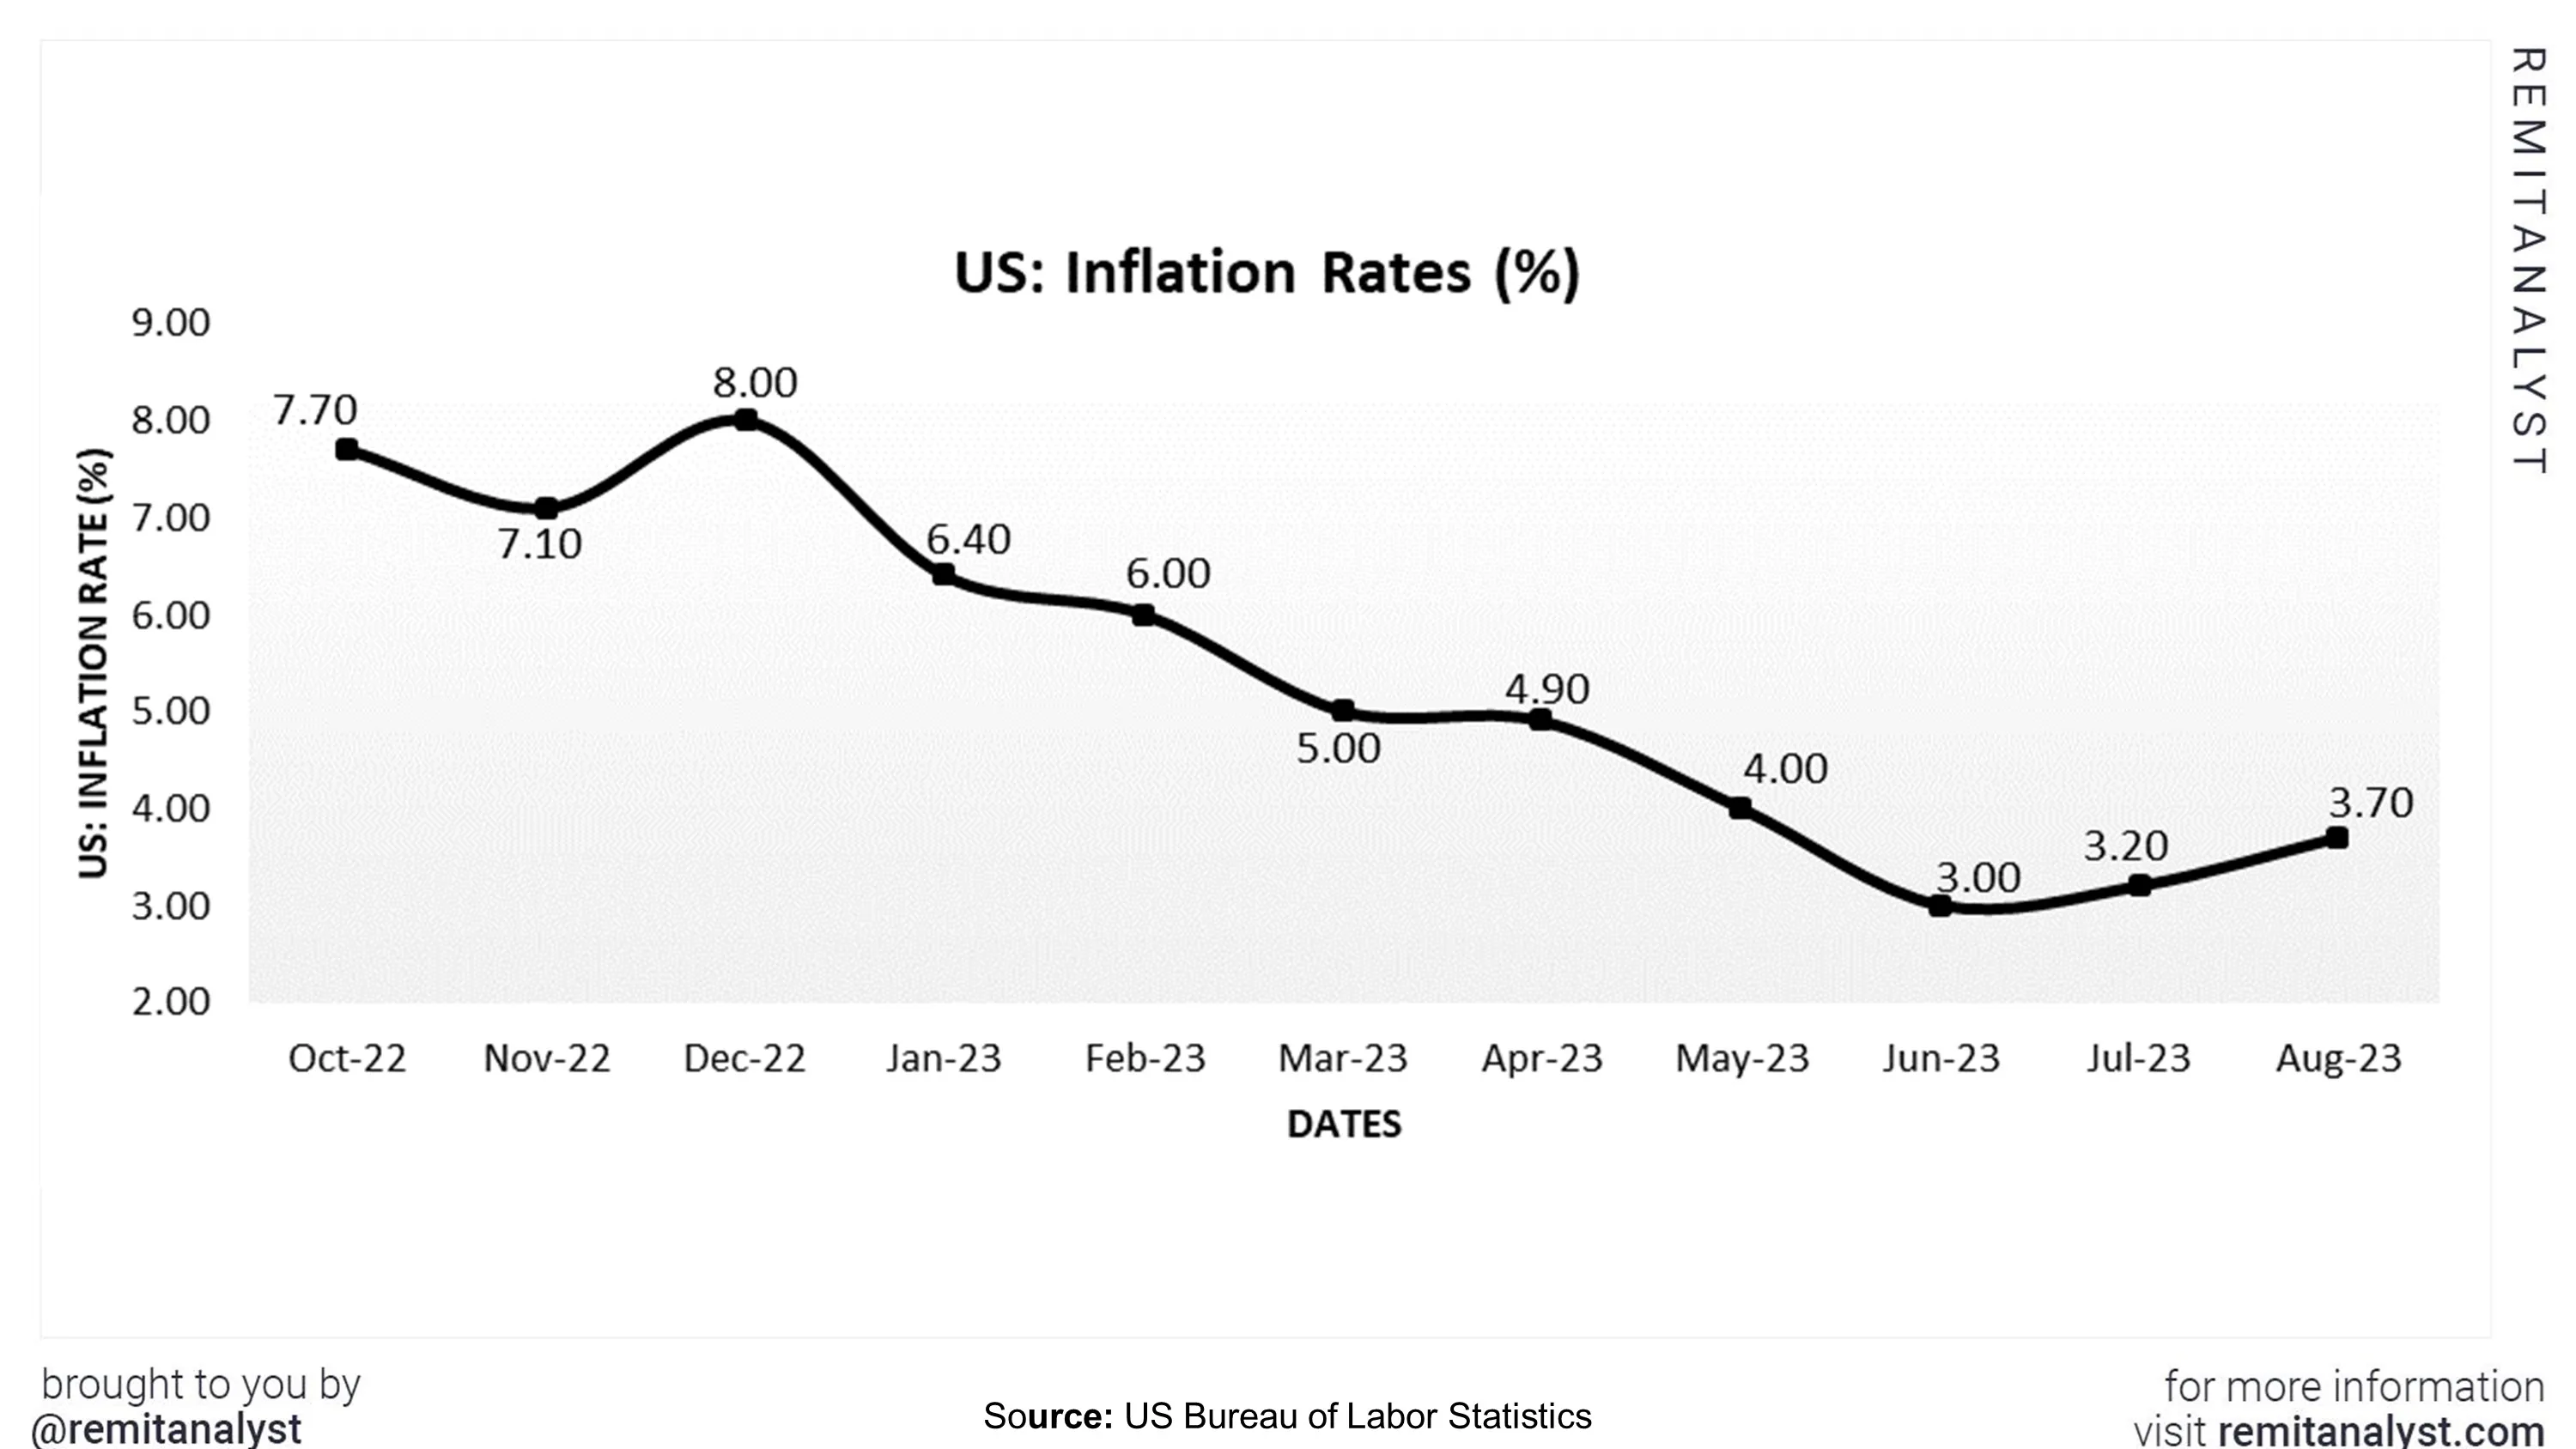 inflation-rates-in-us-from-oct-2022-to-aug-2023